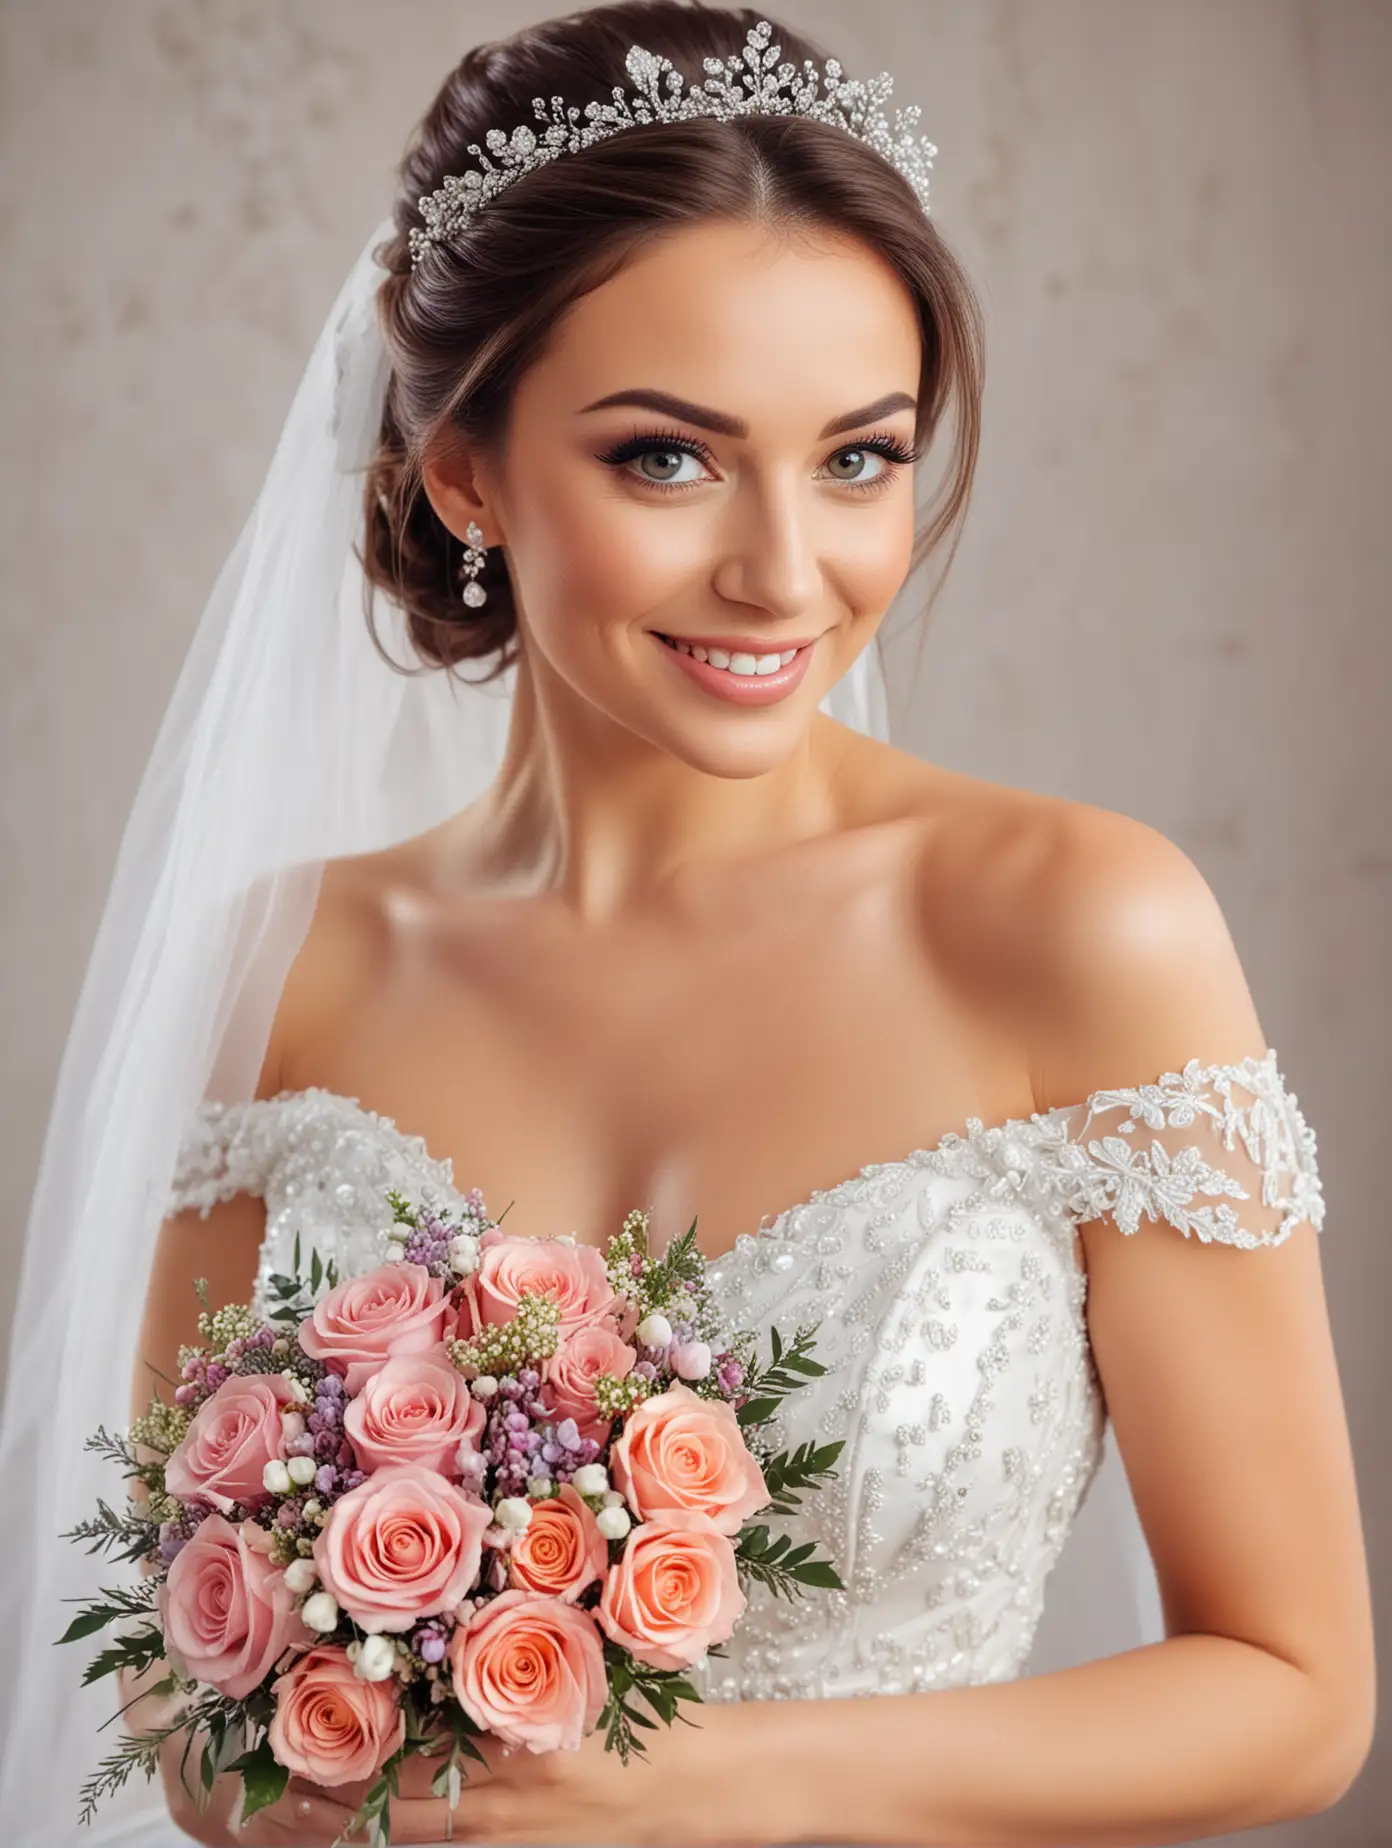 Smiling Bride with Wedding Bouquet and Happy Newlywed Woman